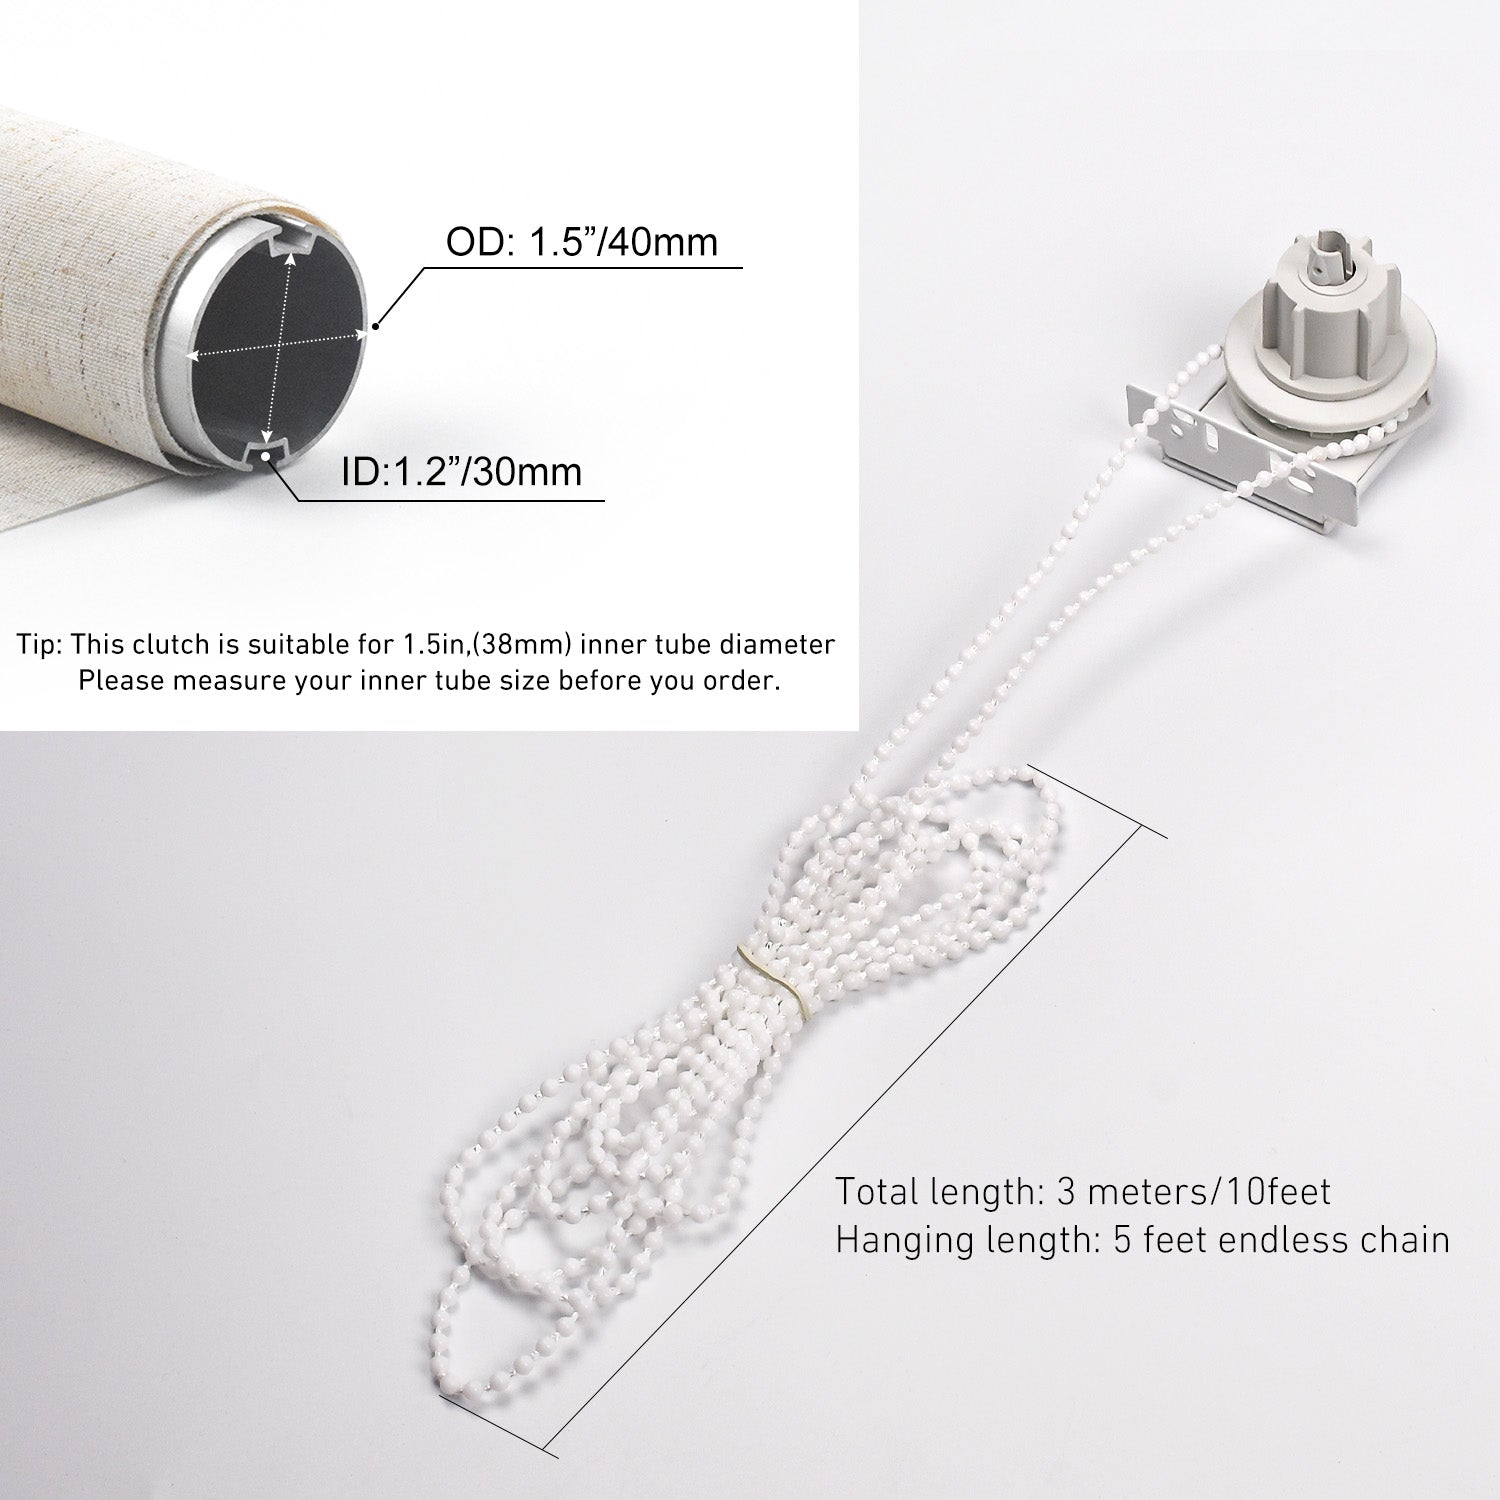 Roller Blind Clutch with Metal Bracket & Bead Chain, Roller Shade Clutch, End Plug for 1 1/2" (38mm)